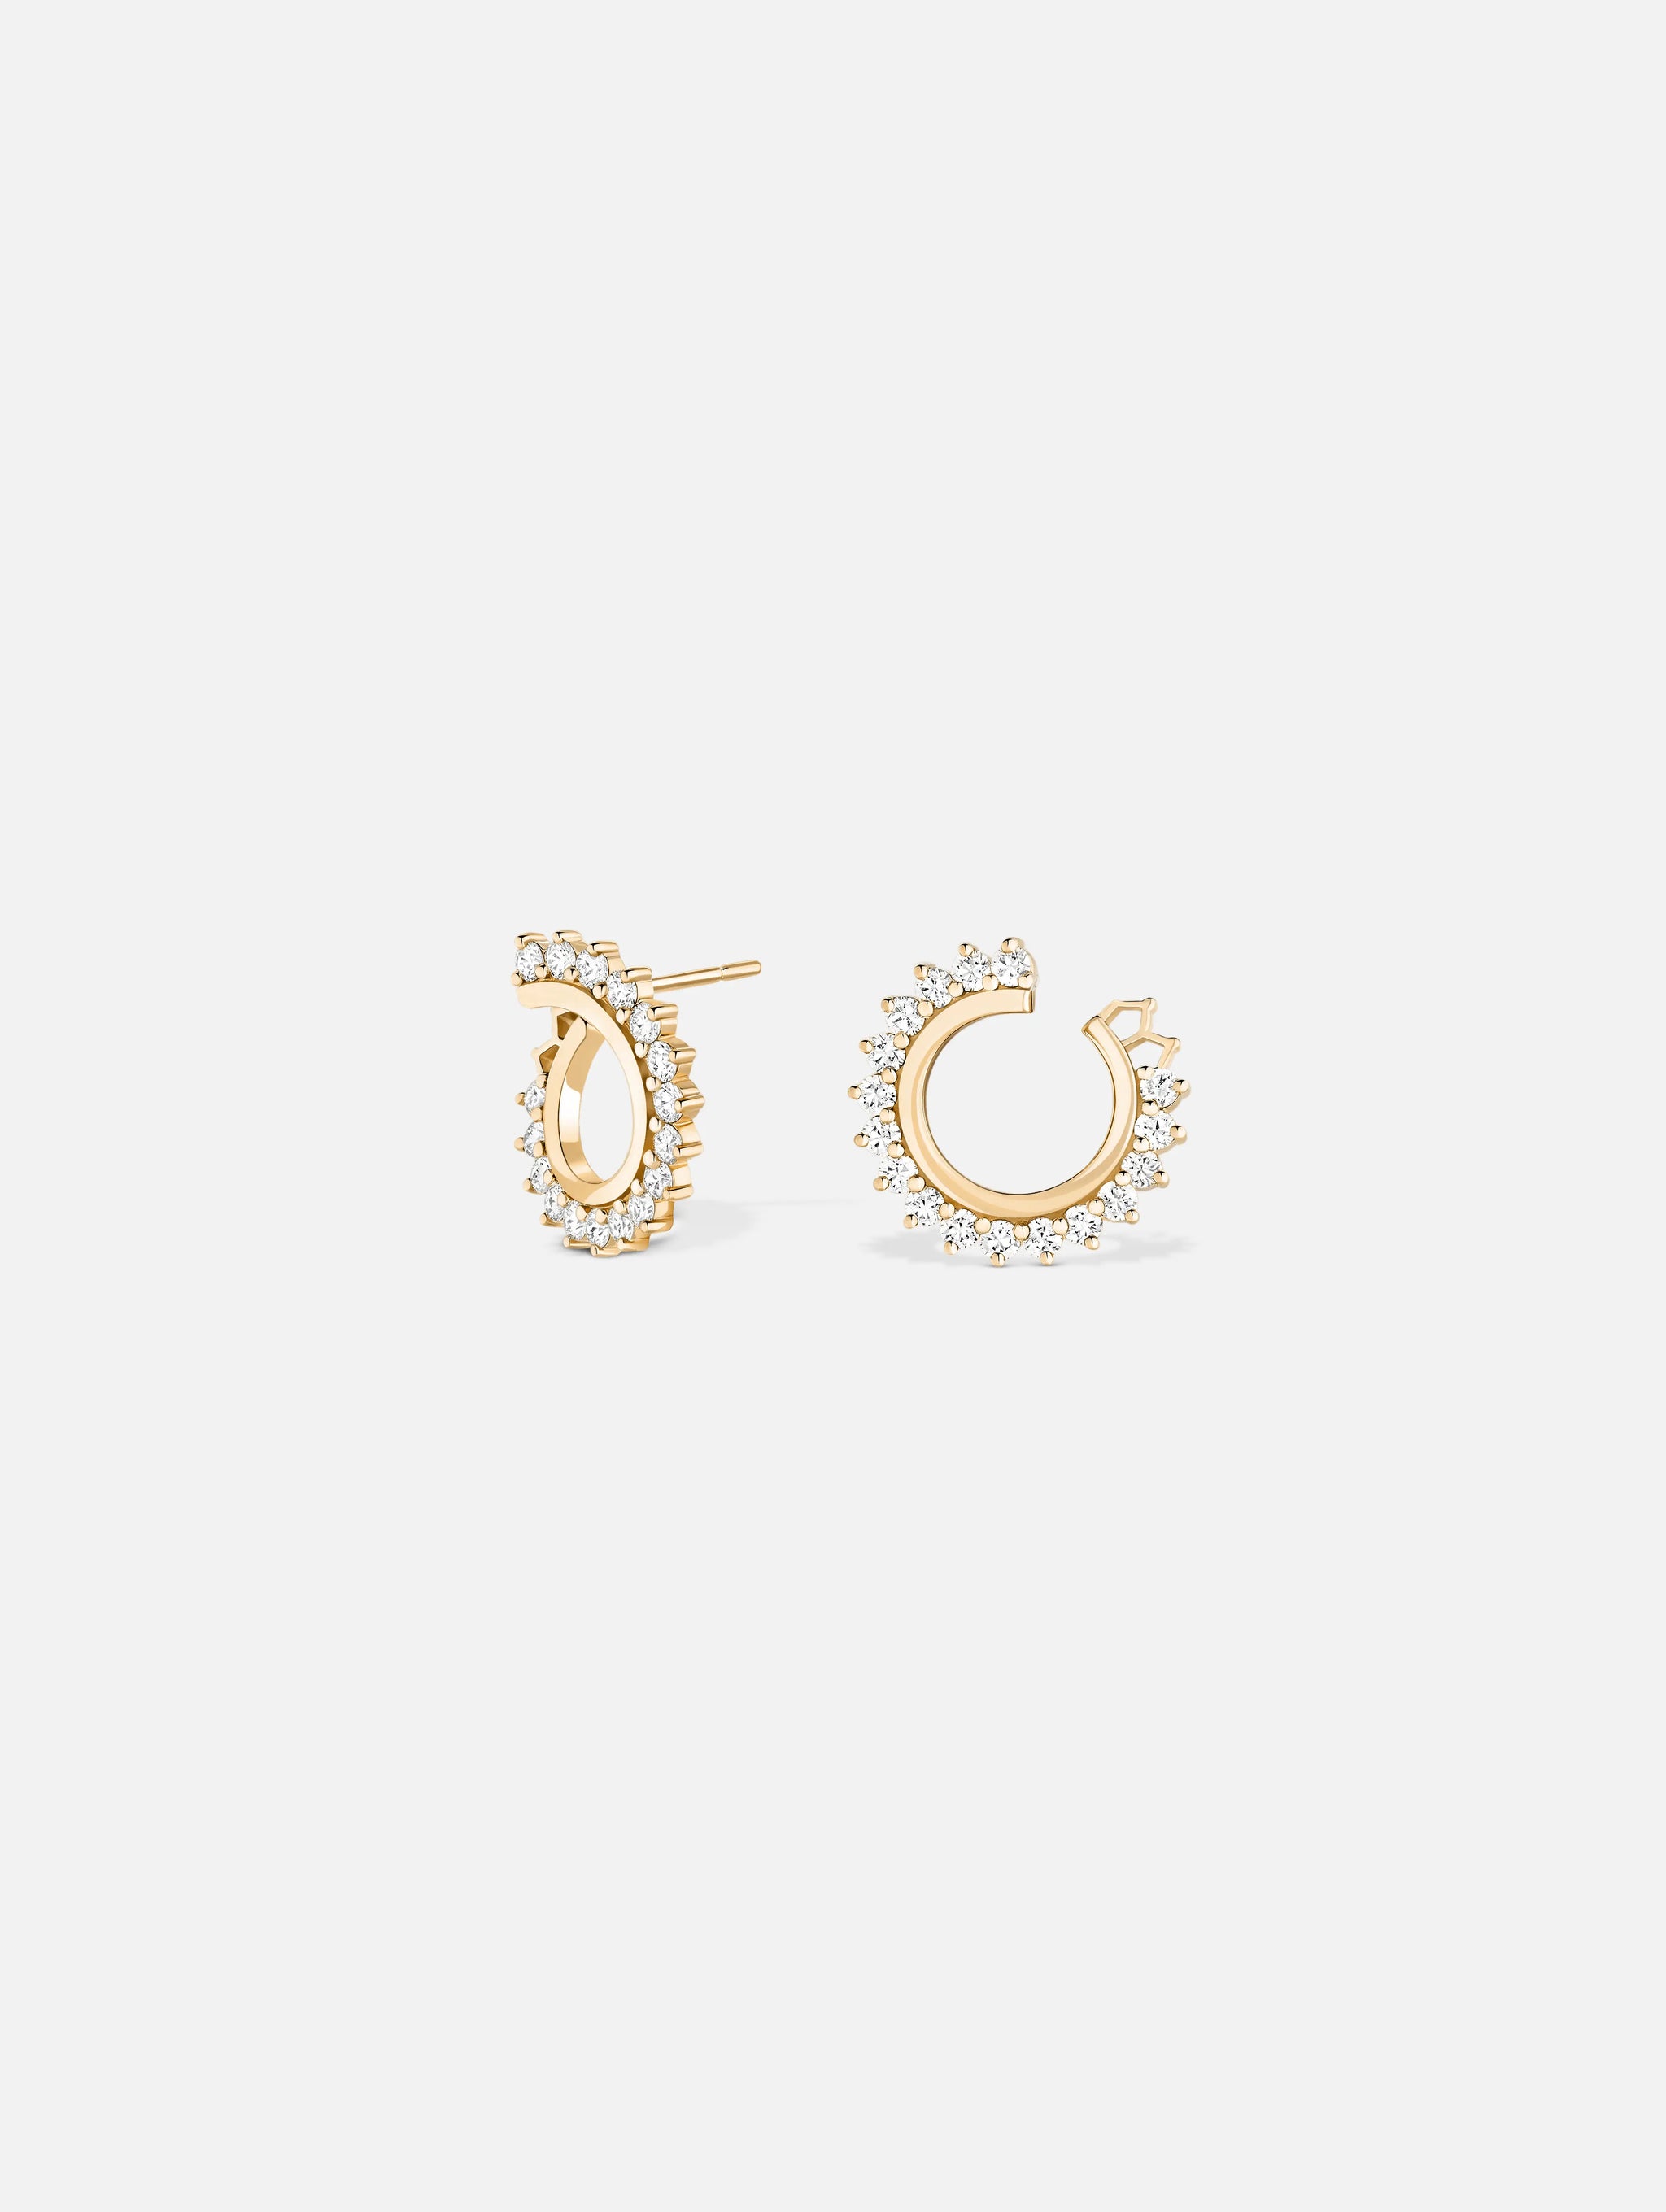 Diamond Earrings in Yellow Gold - 1 - Nouvel Heritage